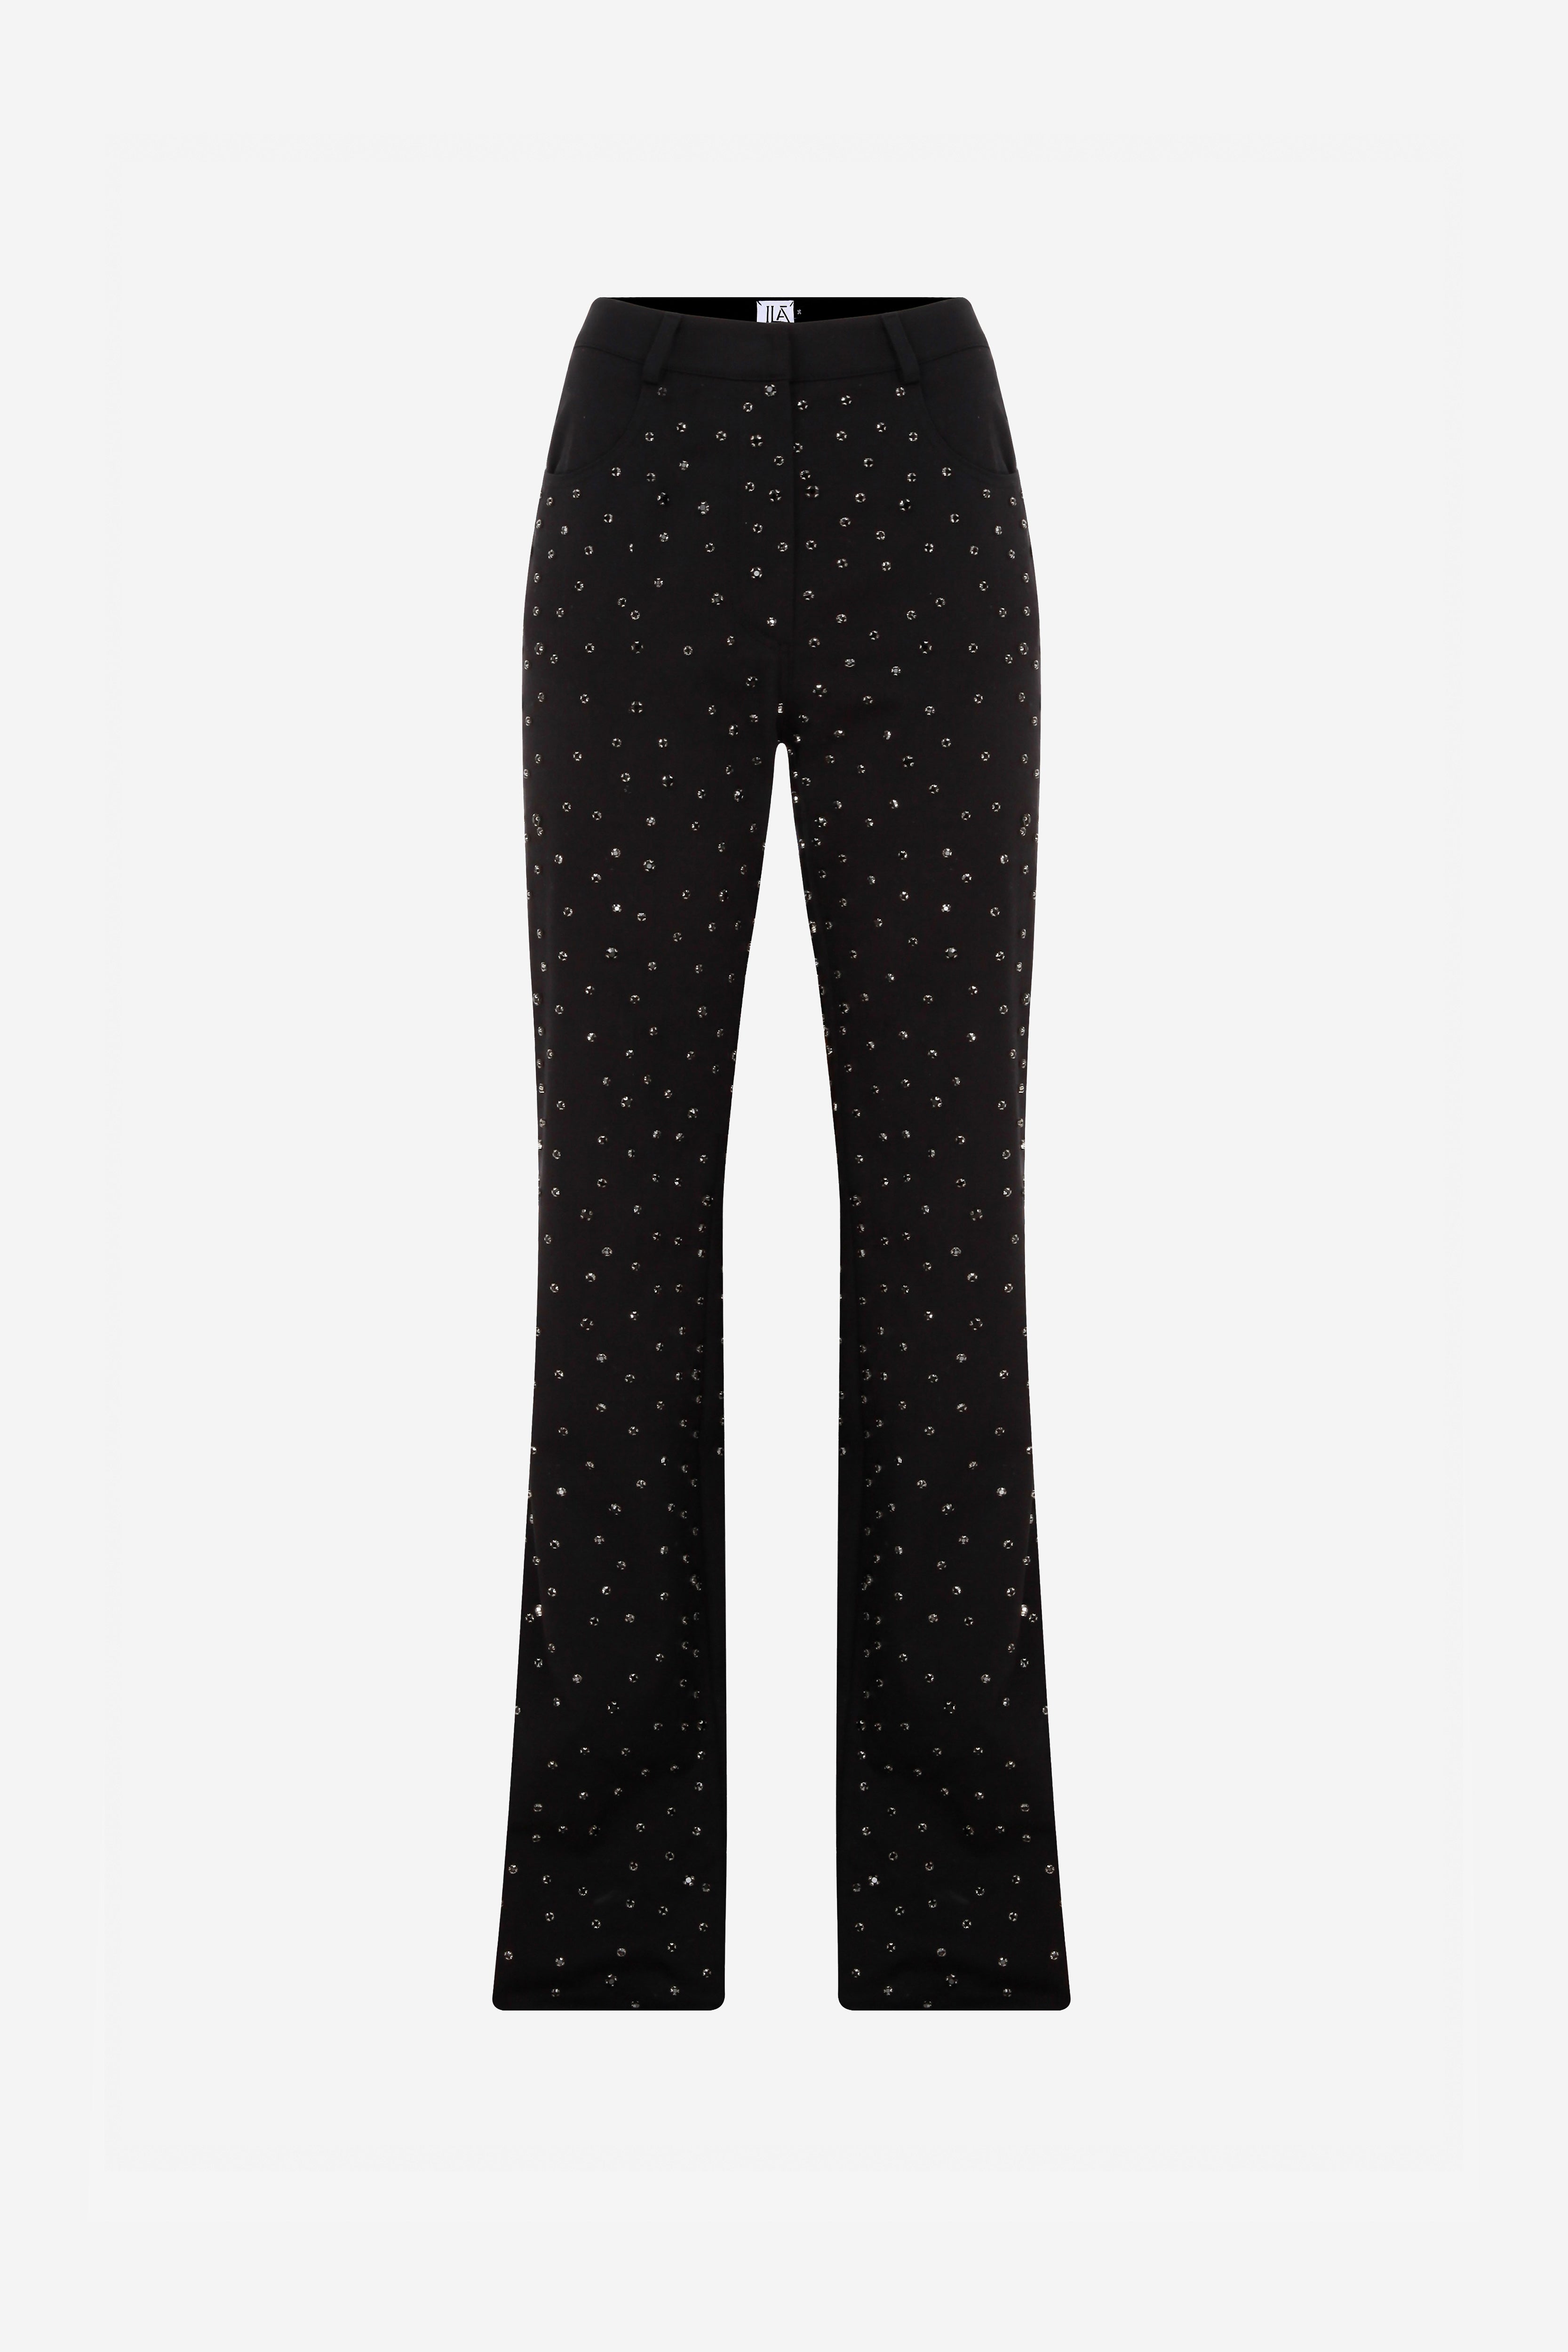 Mira - Embellished Cotton Trousers